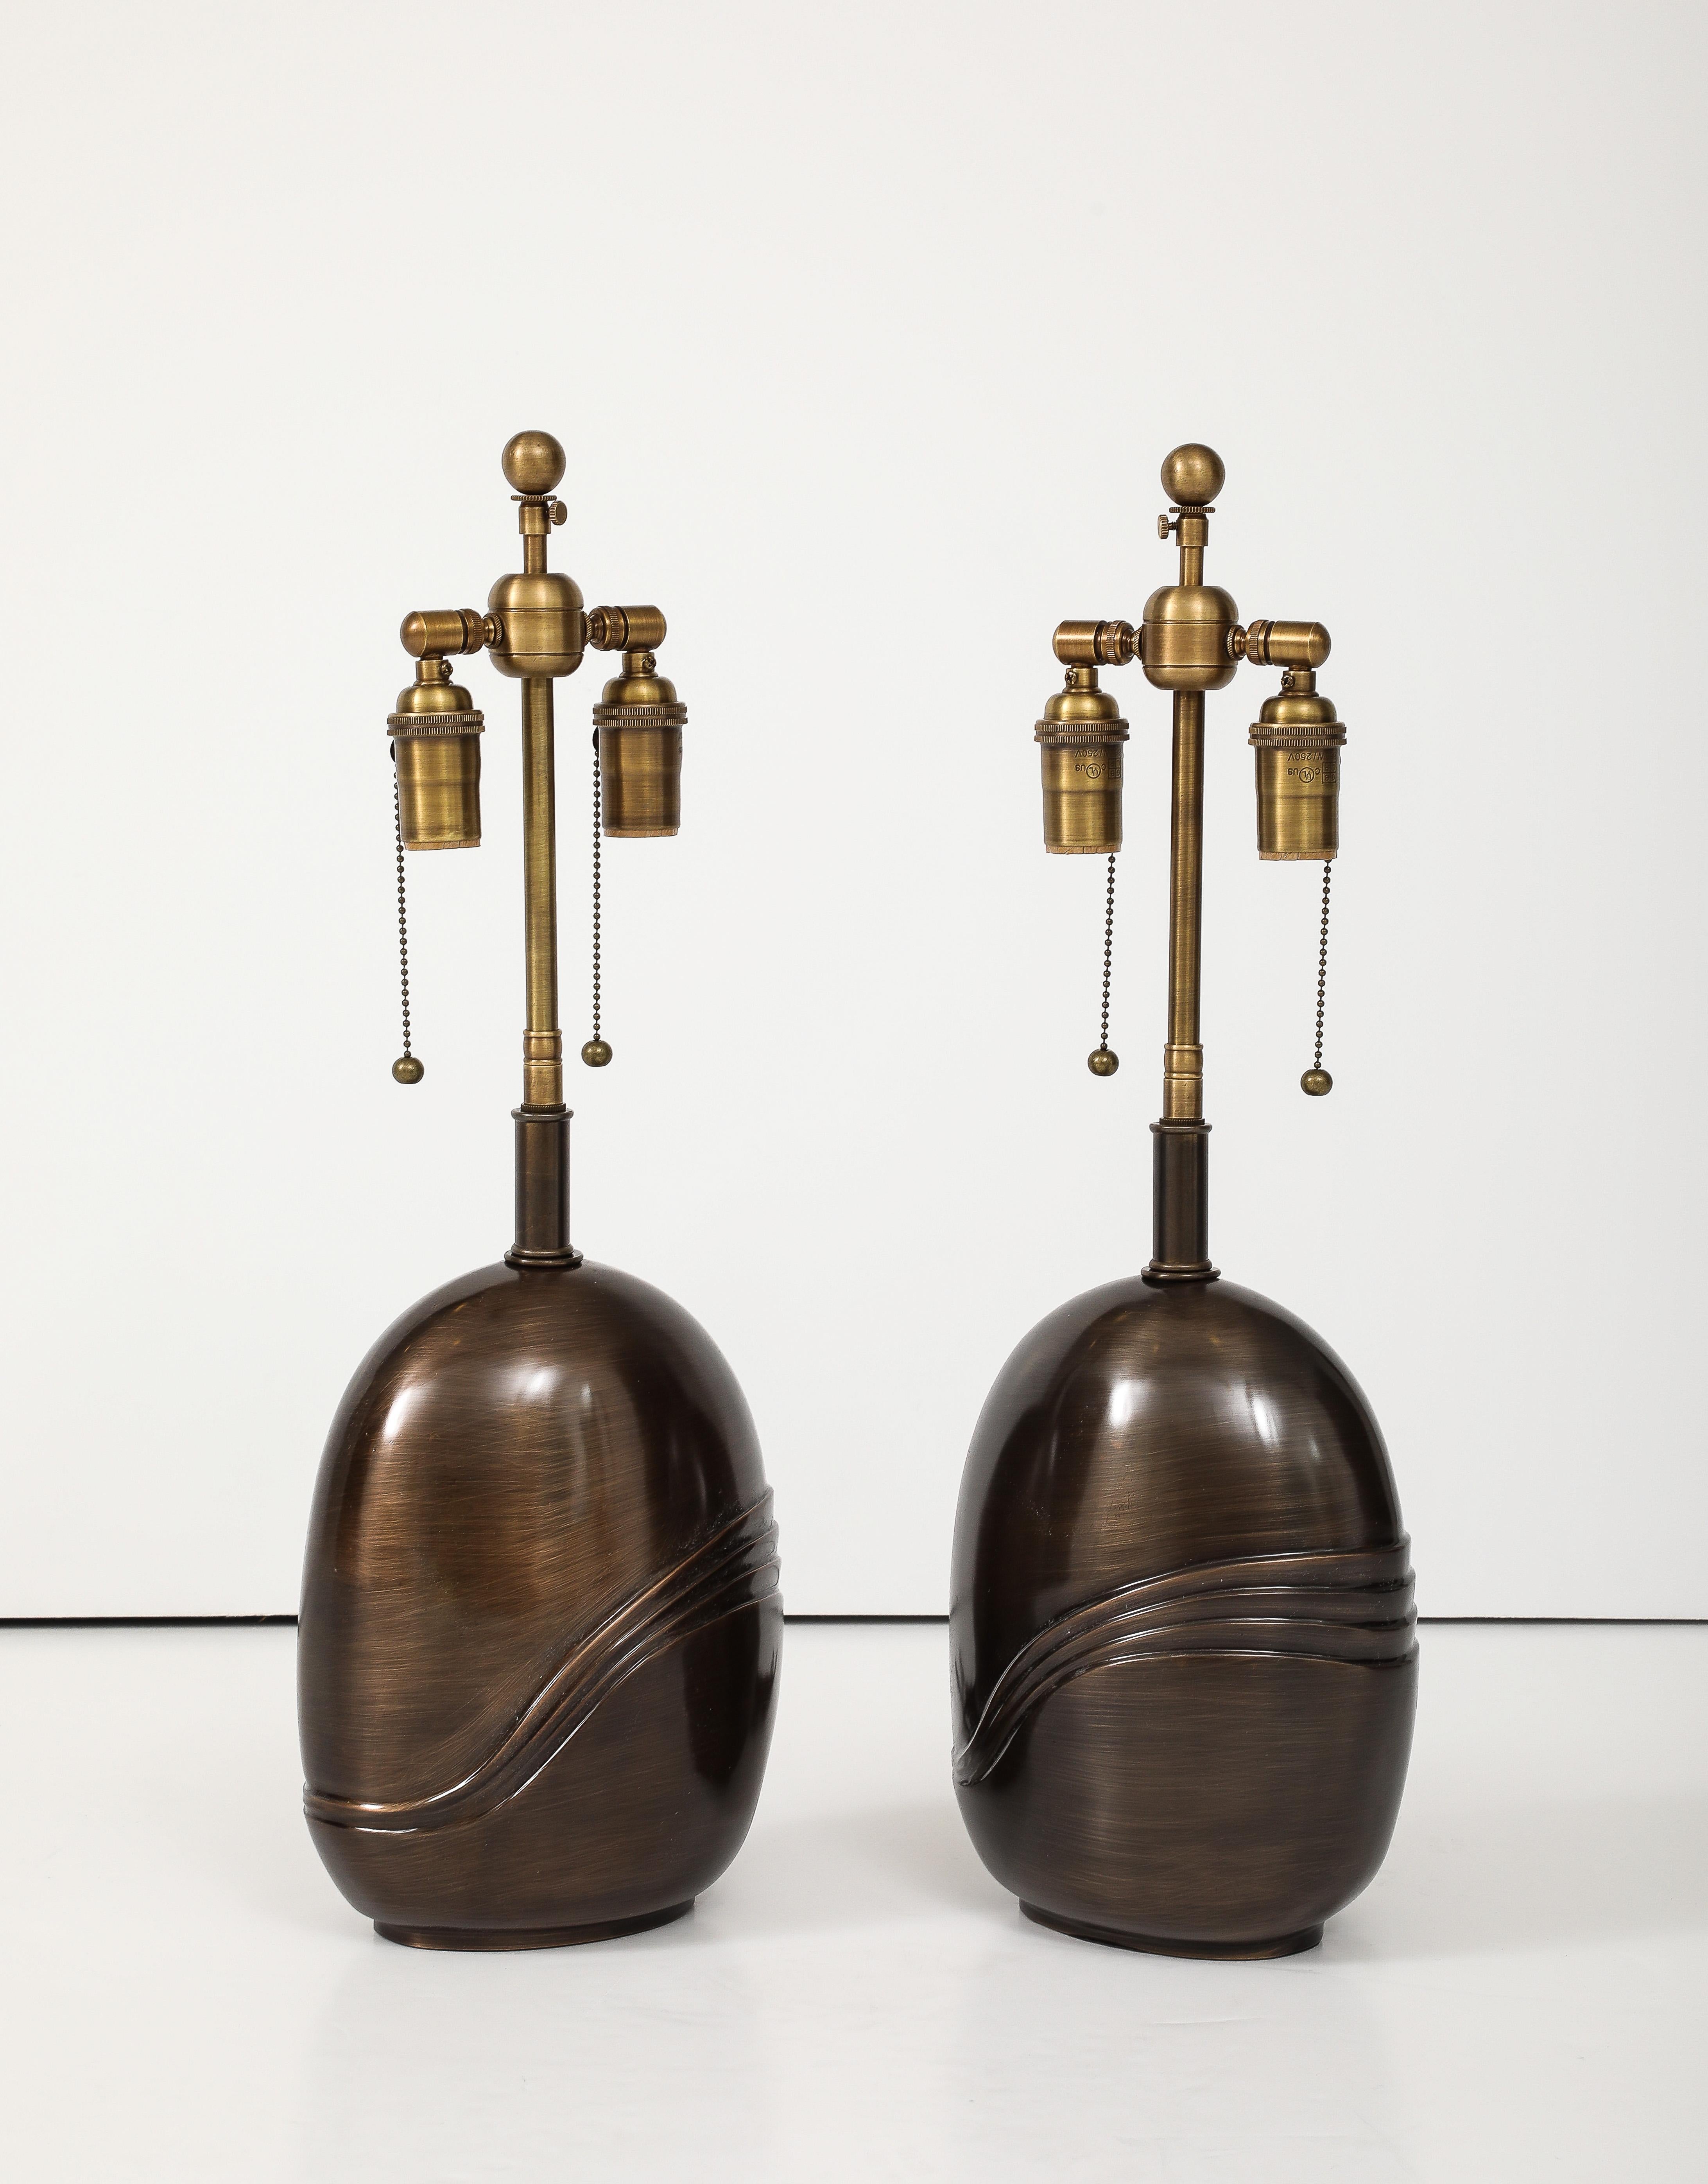 Pair of  1980's Solid Bronze lamps by Esa fedrigolli.
The lamps have a beautiful Antique Bronze finish and they have been Newly rewired with adjustable Bronzed finished double clusters and silk rayon cords.
The Overall height to the finial is 23.5